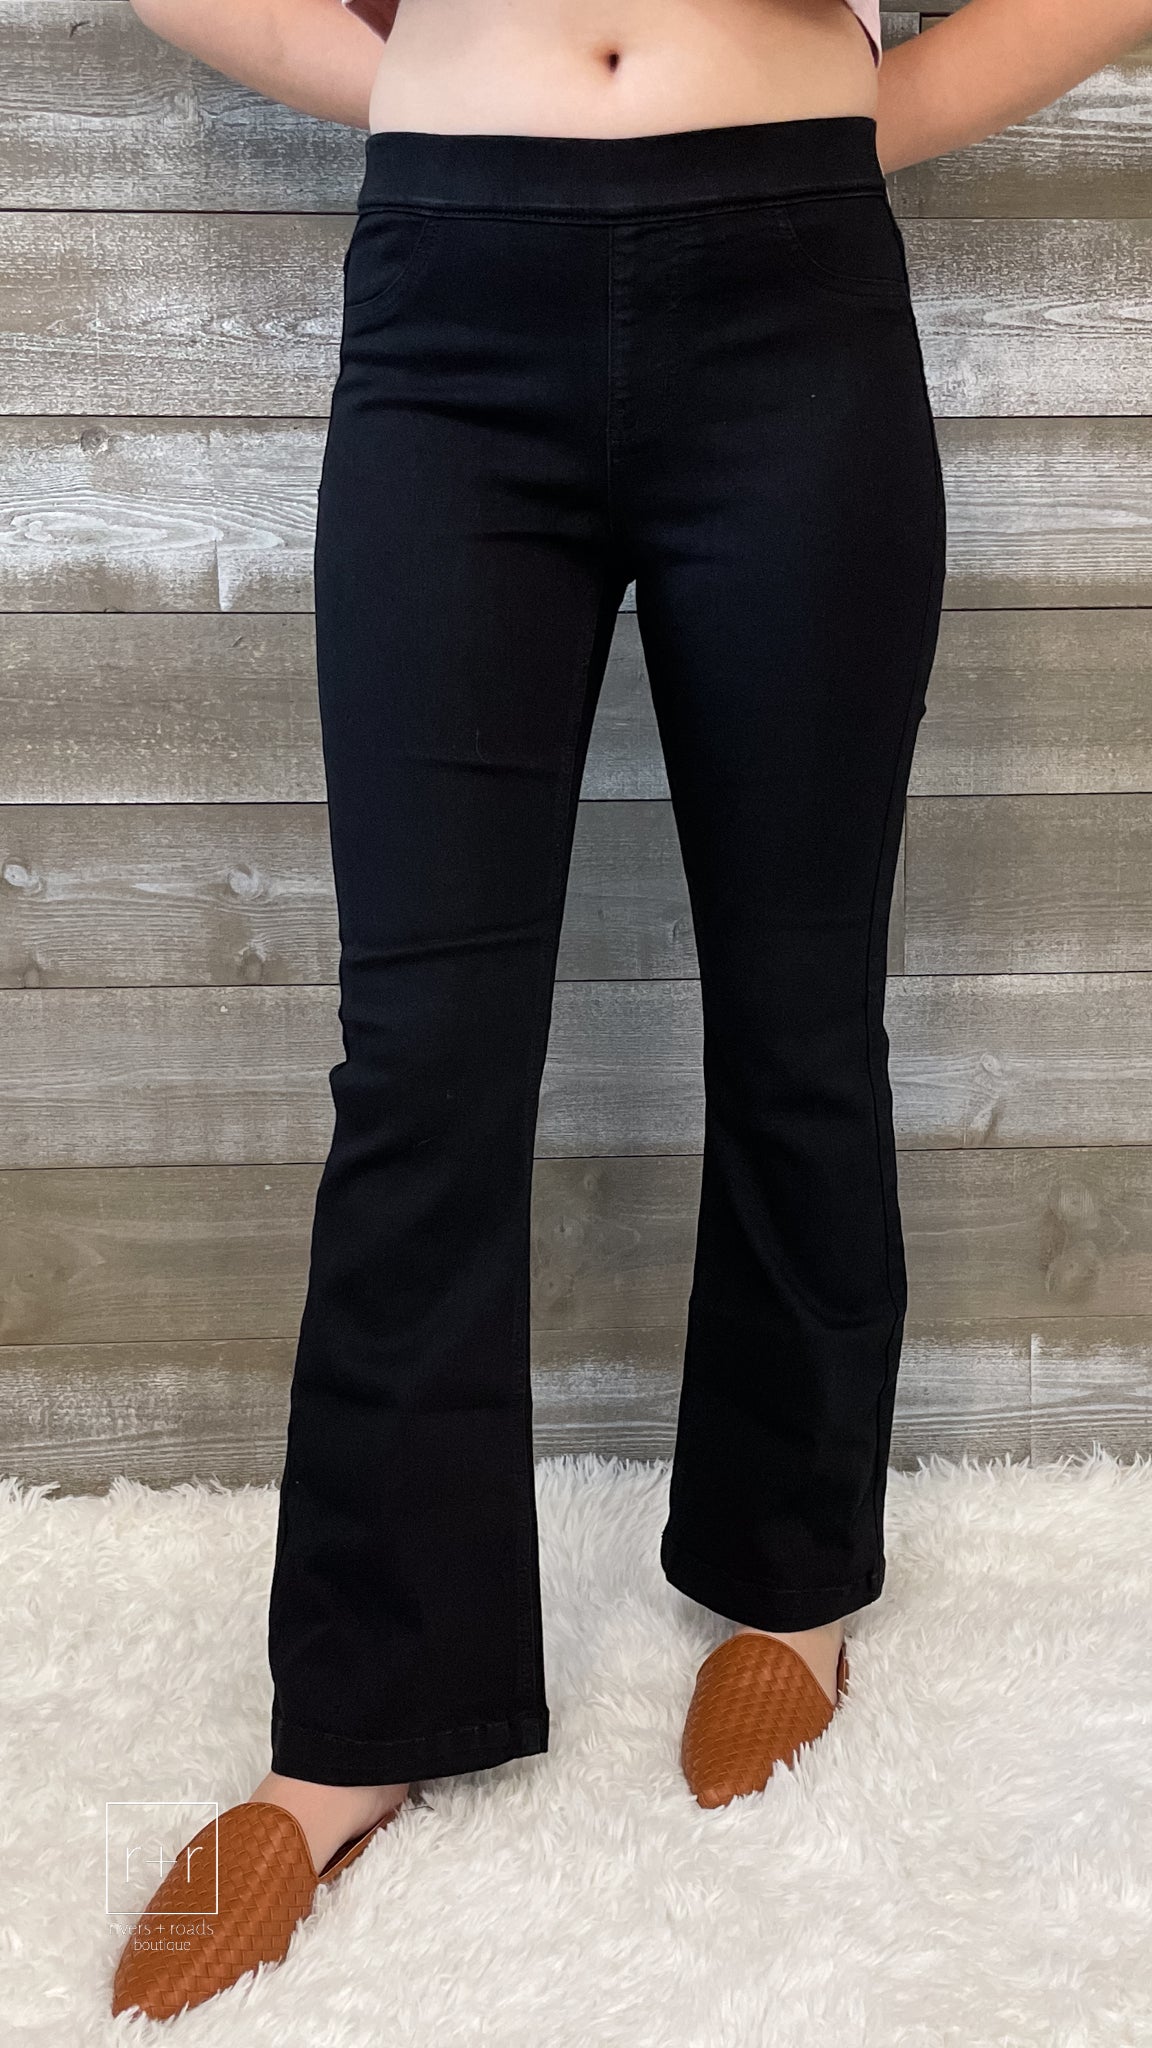 cello jeans black pull on petite flare jeans in a jegging style AB35173BLK